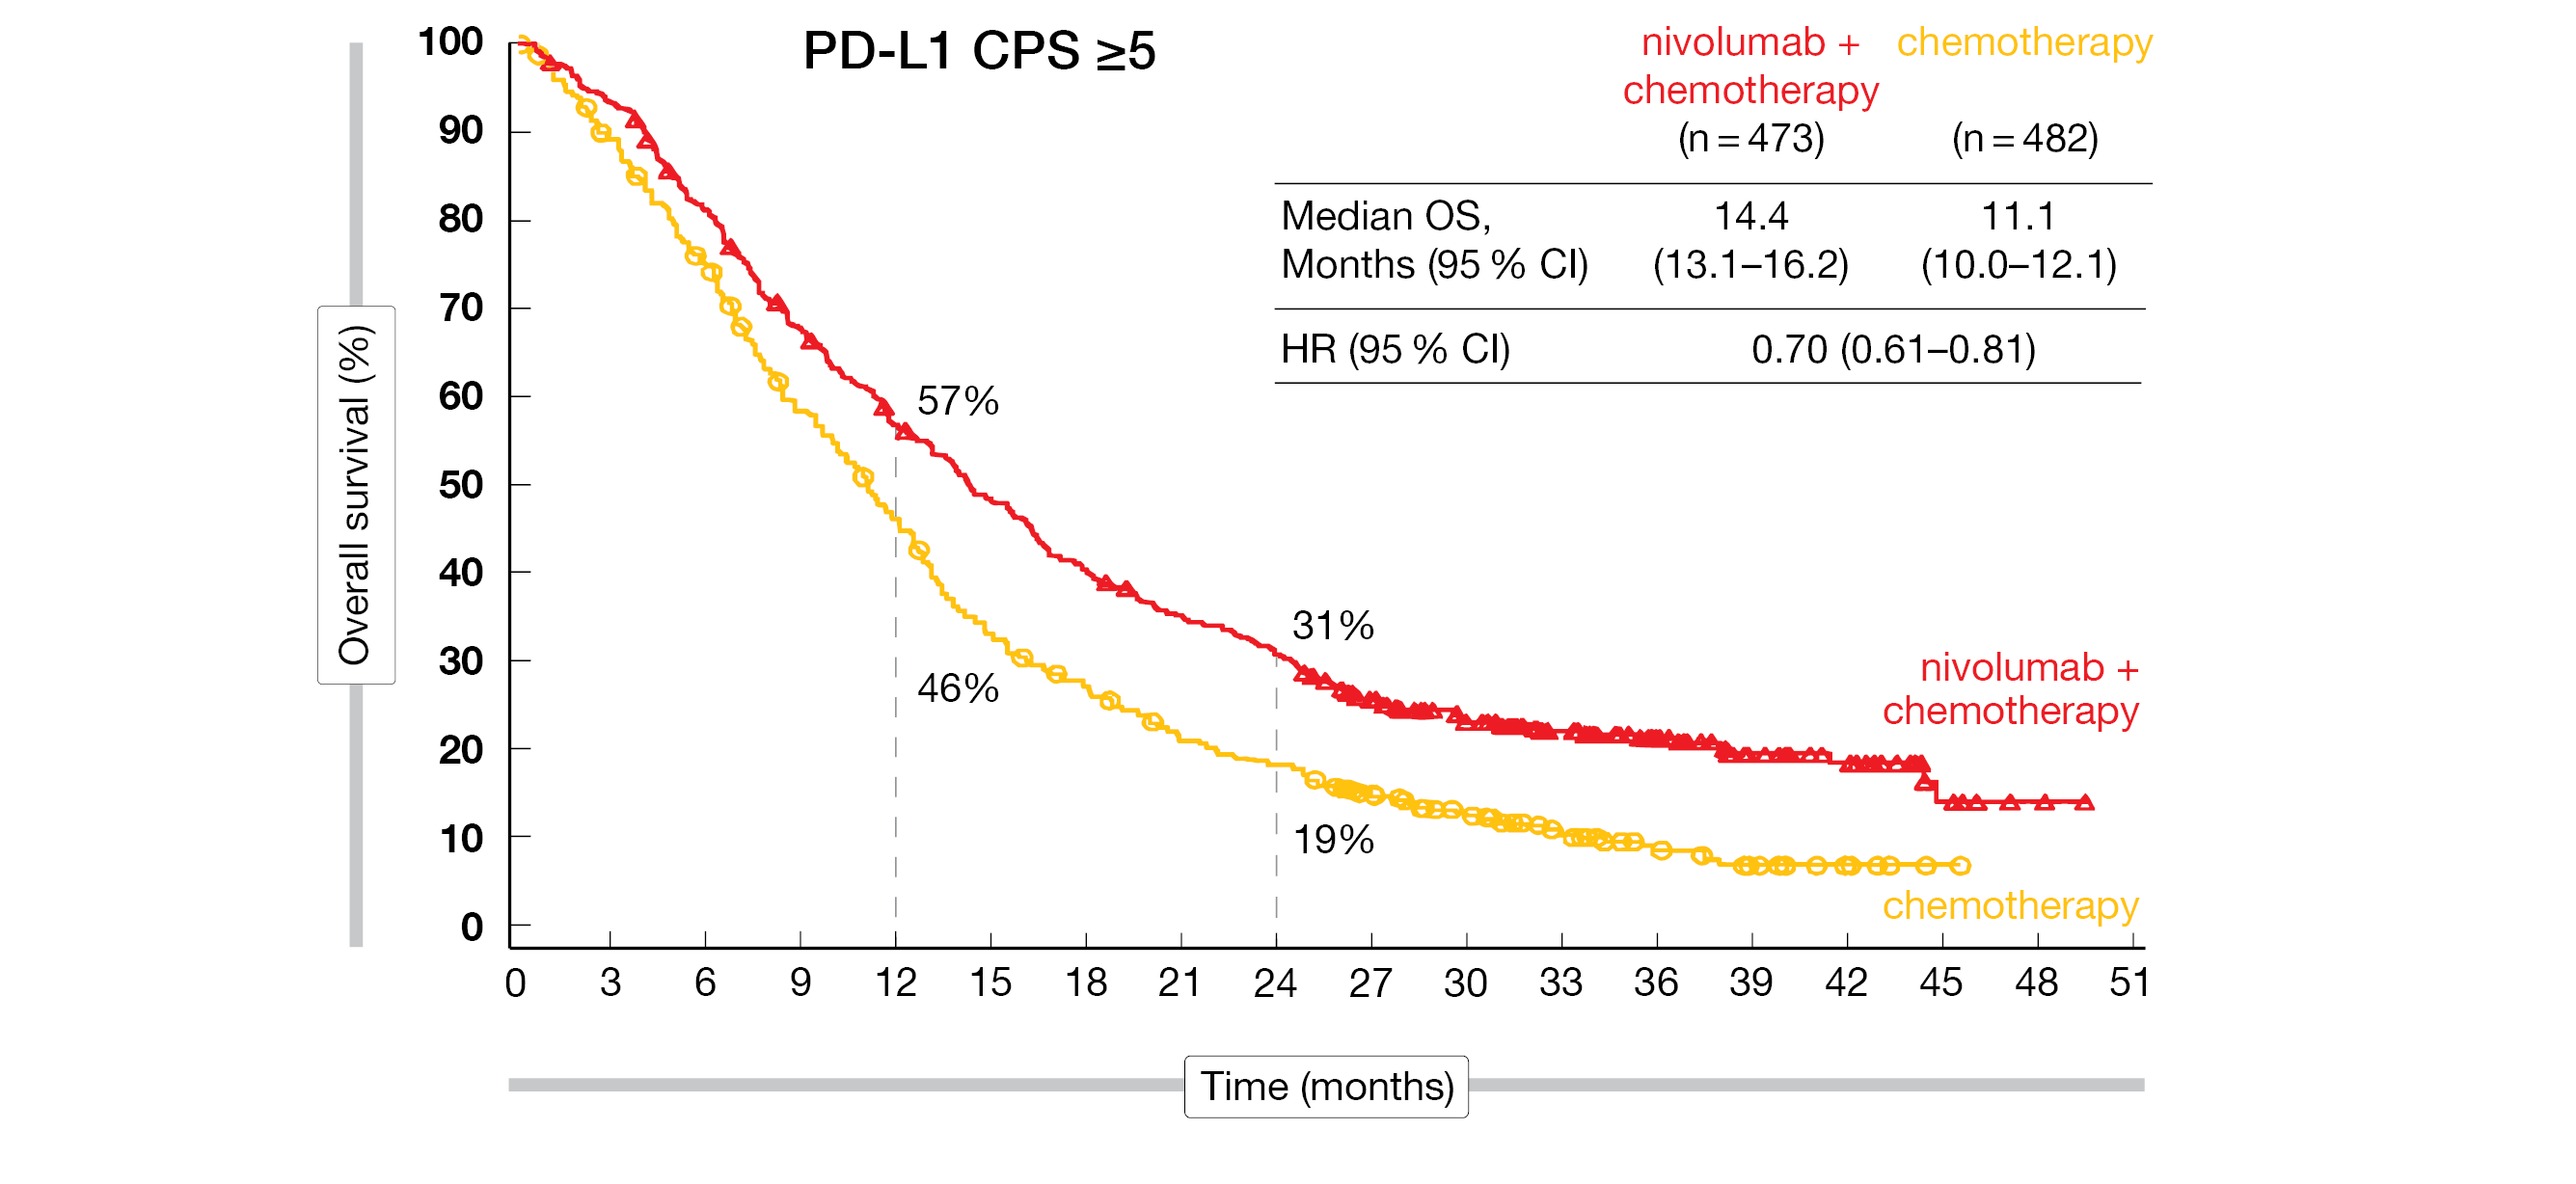 Figure 1: CheckMate 649: overall survival of PD-L1-expressing patients with advanced or metastatic GEA treated with nivolumab plus chemotherapy or chemotherapy alone.